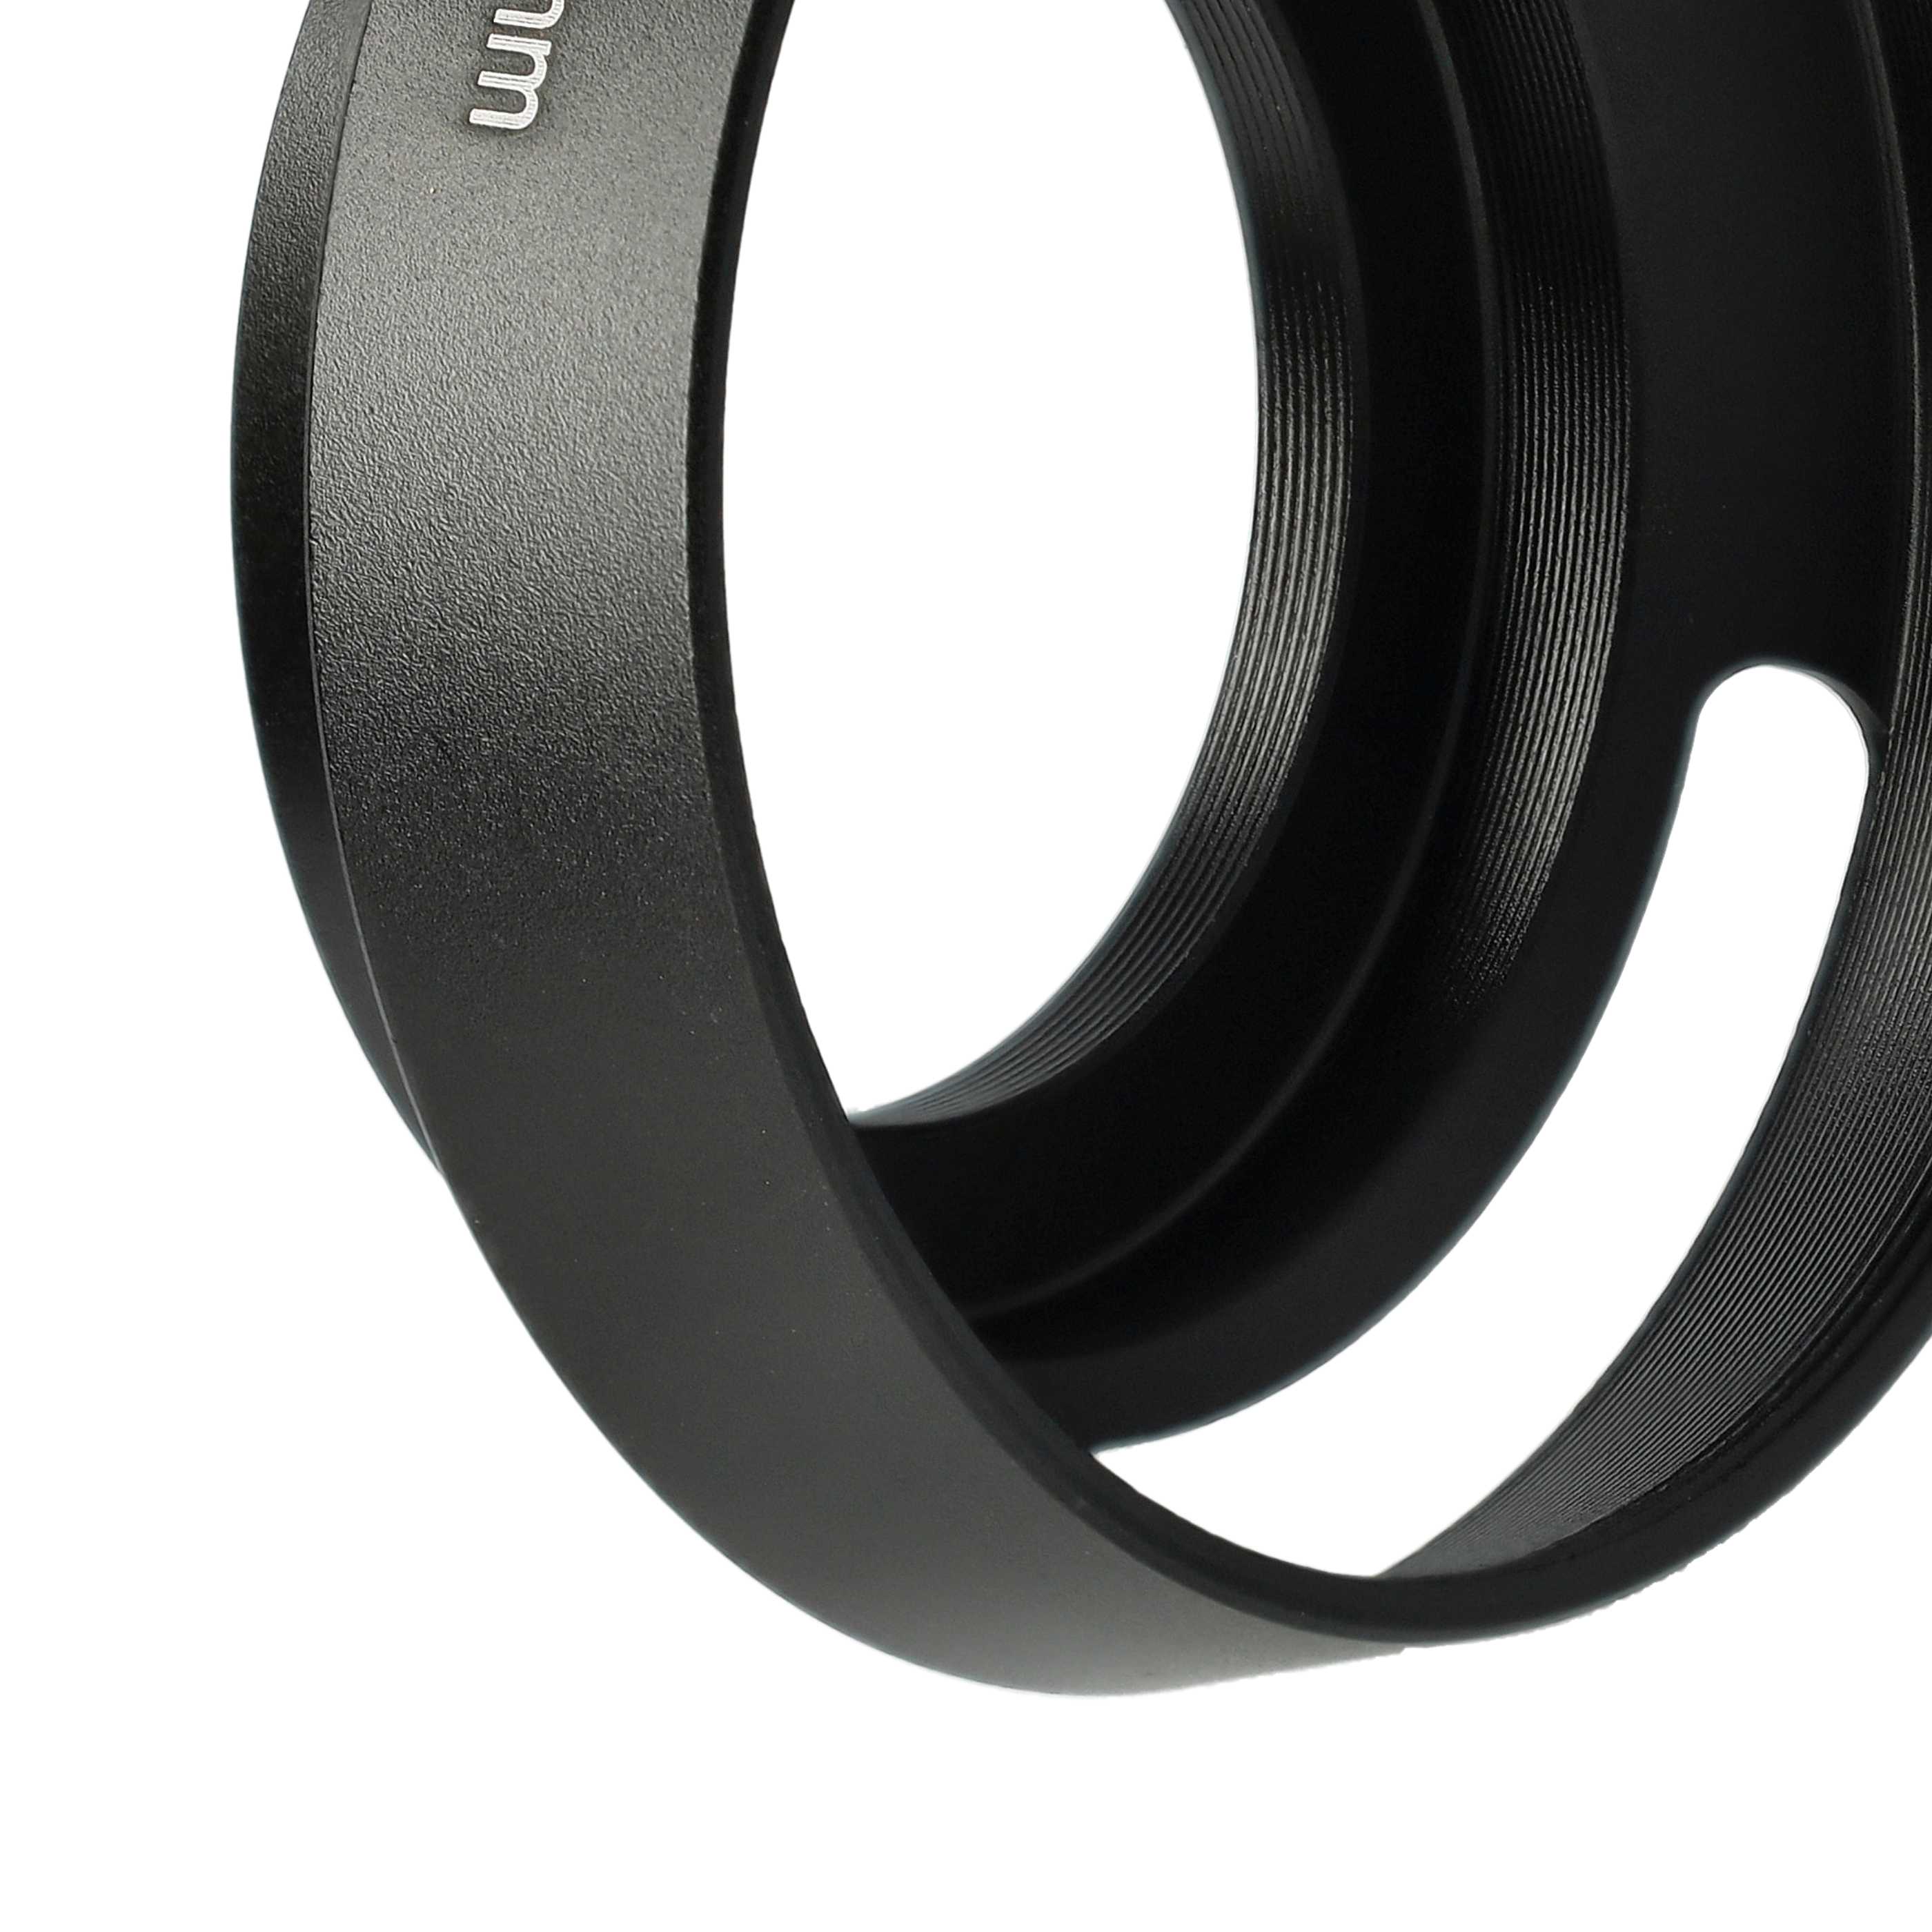 Lens Hood suitable for 35mm Lens - Lens Shade, with Filter Thread (51 mm) Black, Round, with Recesses